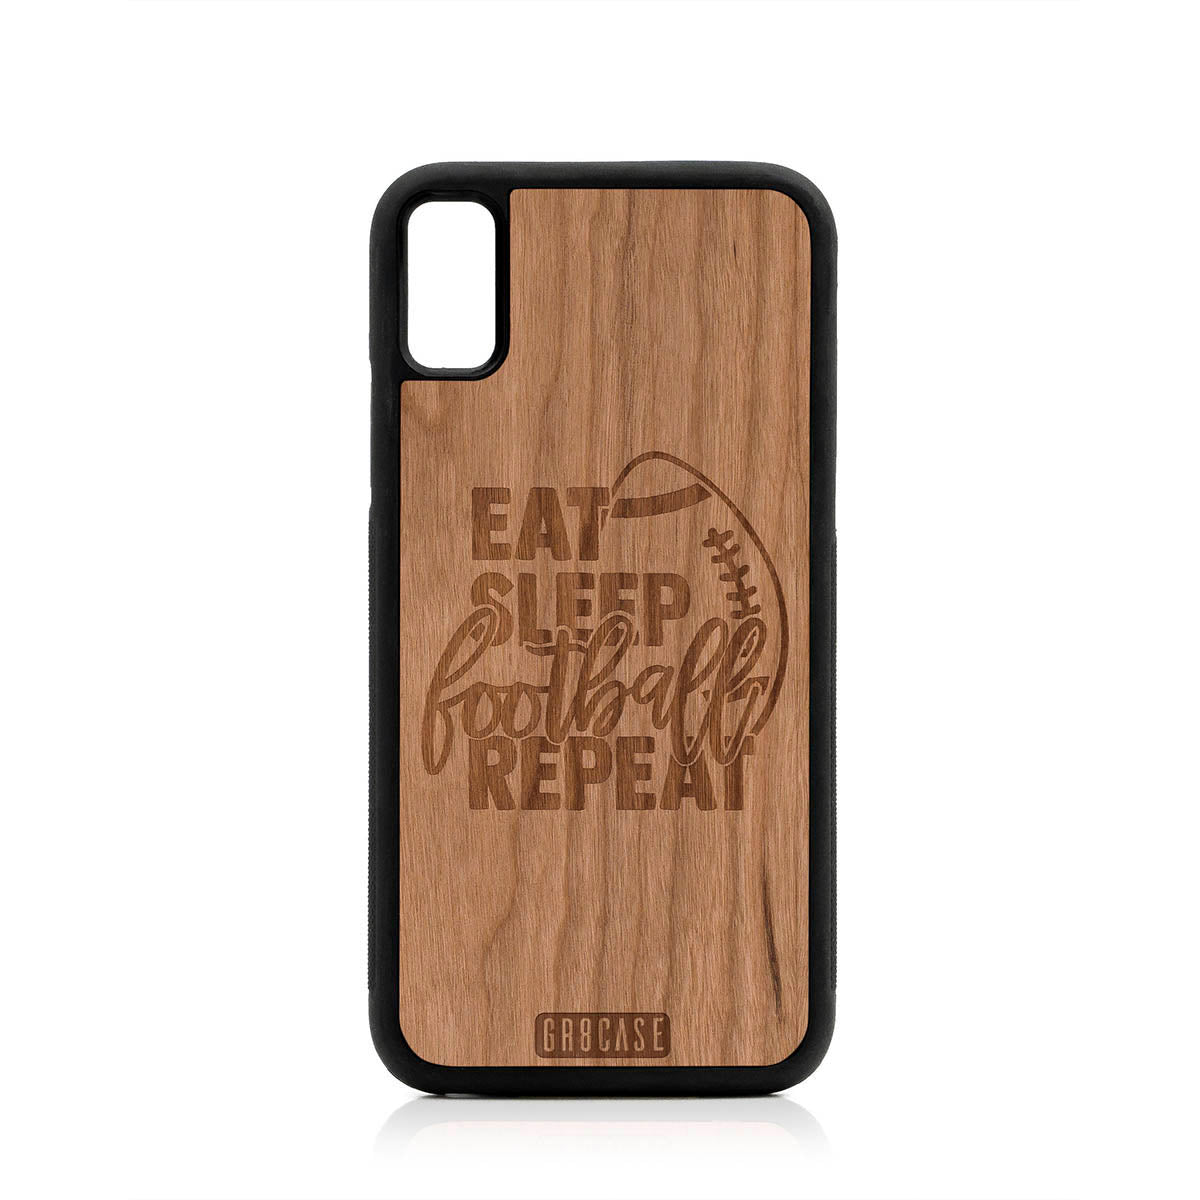 Eat Sleep Football Repeat Design Wood Case For iPhone XS Max